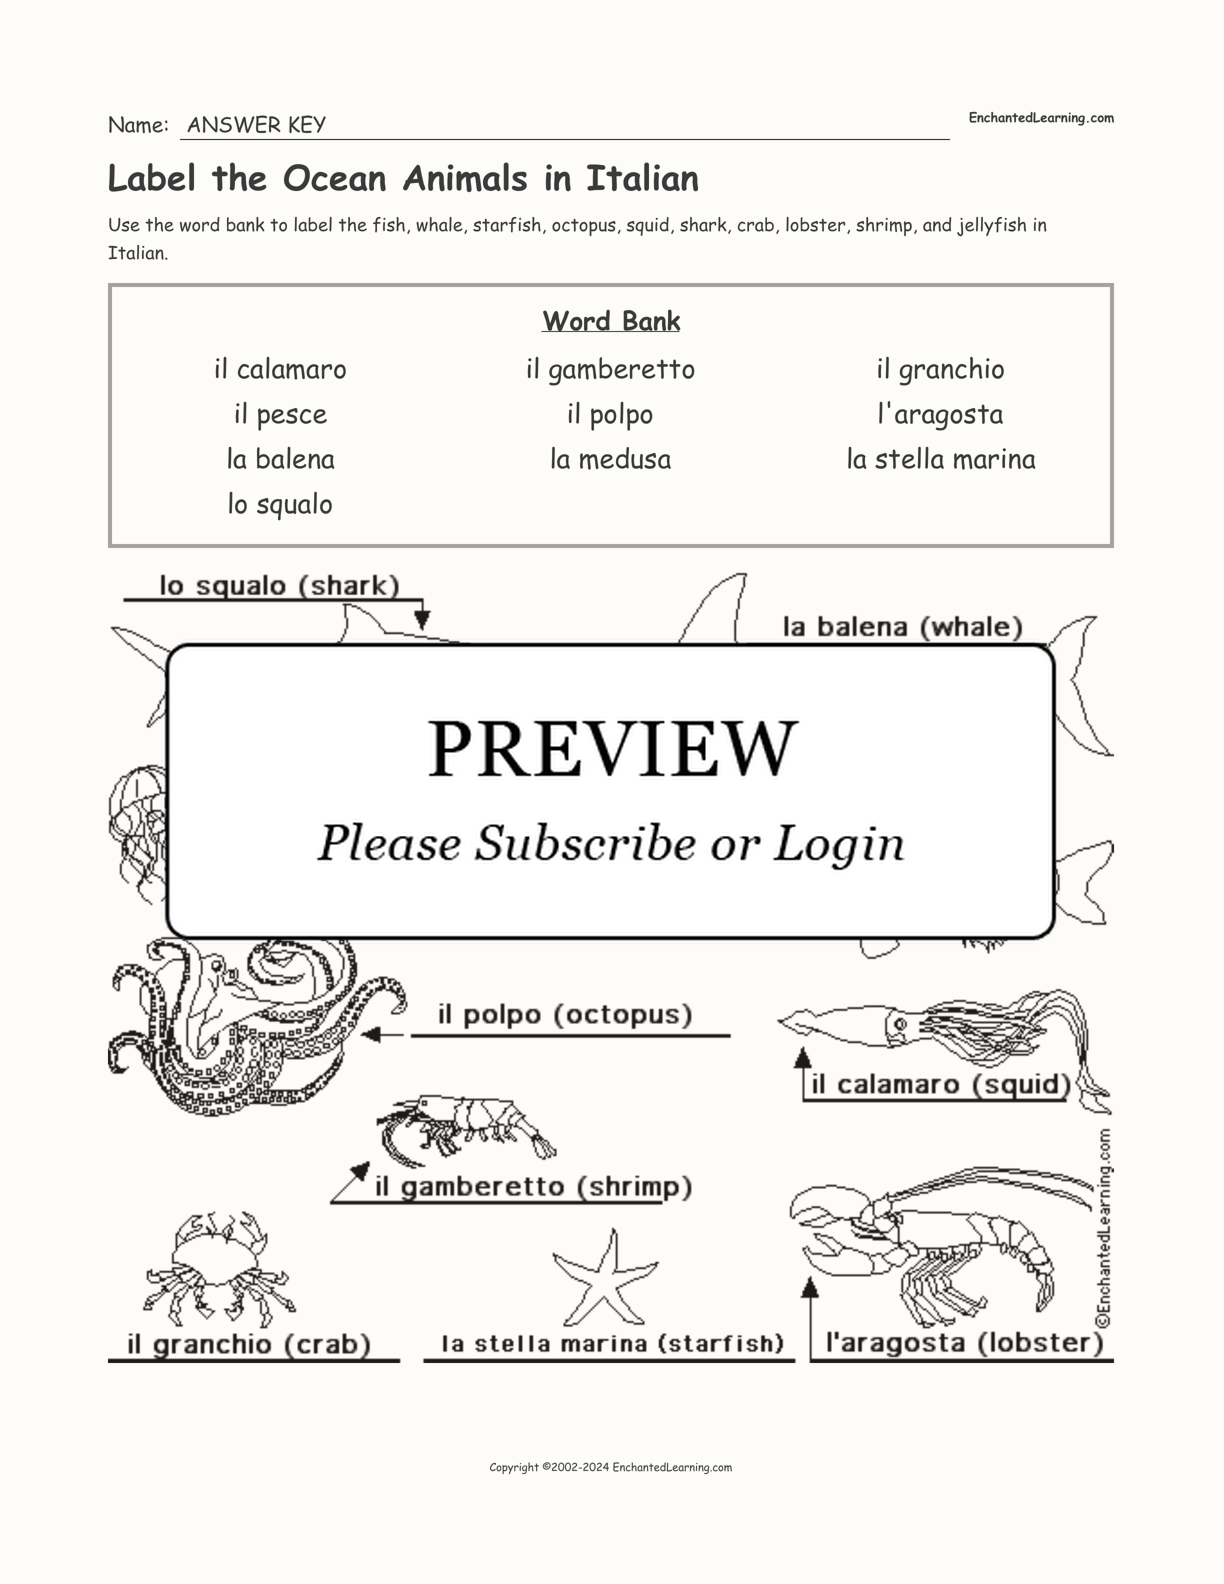 Label the Ocean Animals in Italian interactive worksheet page 2